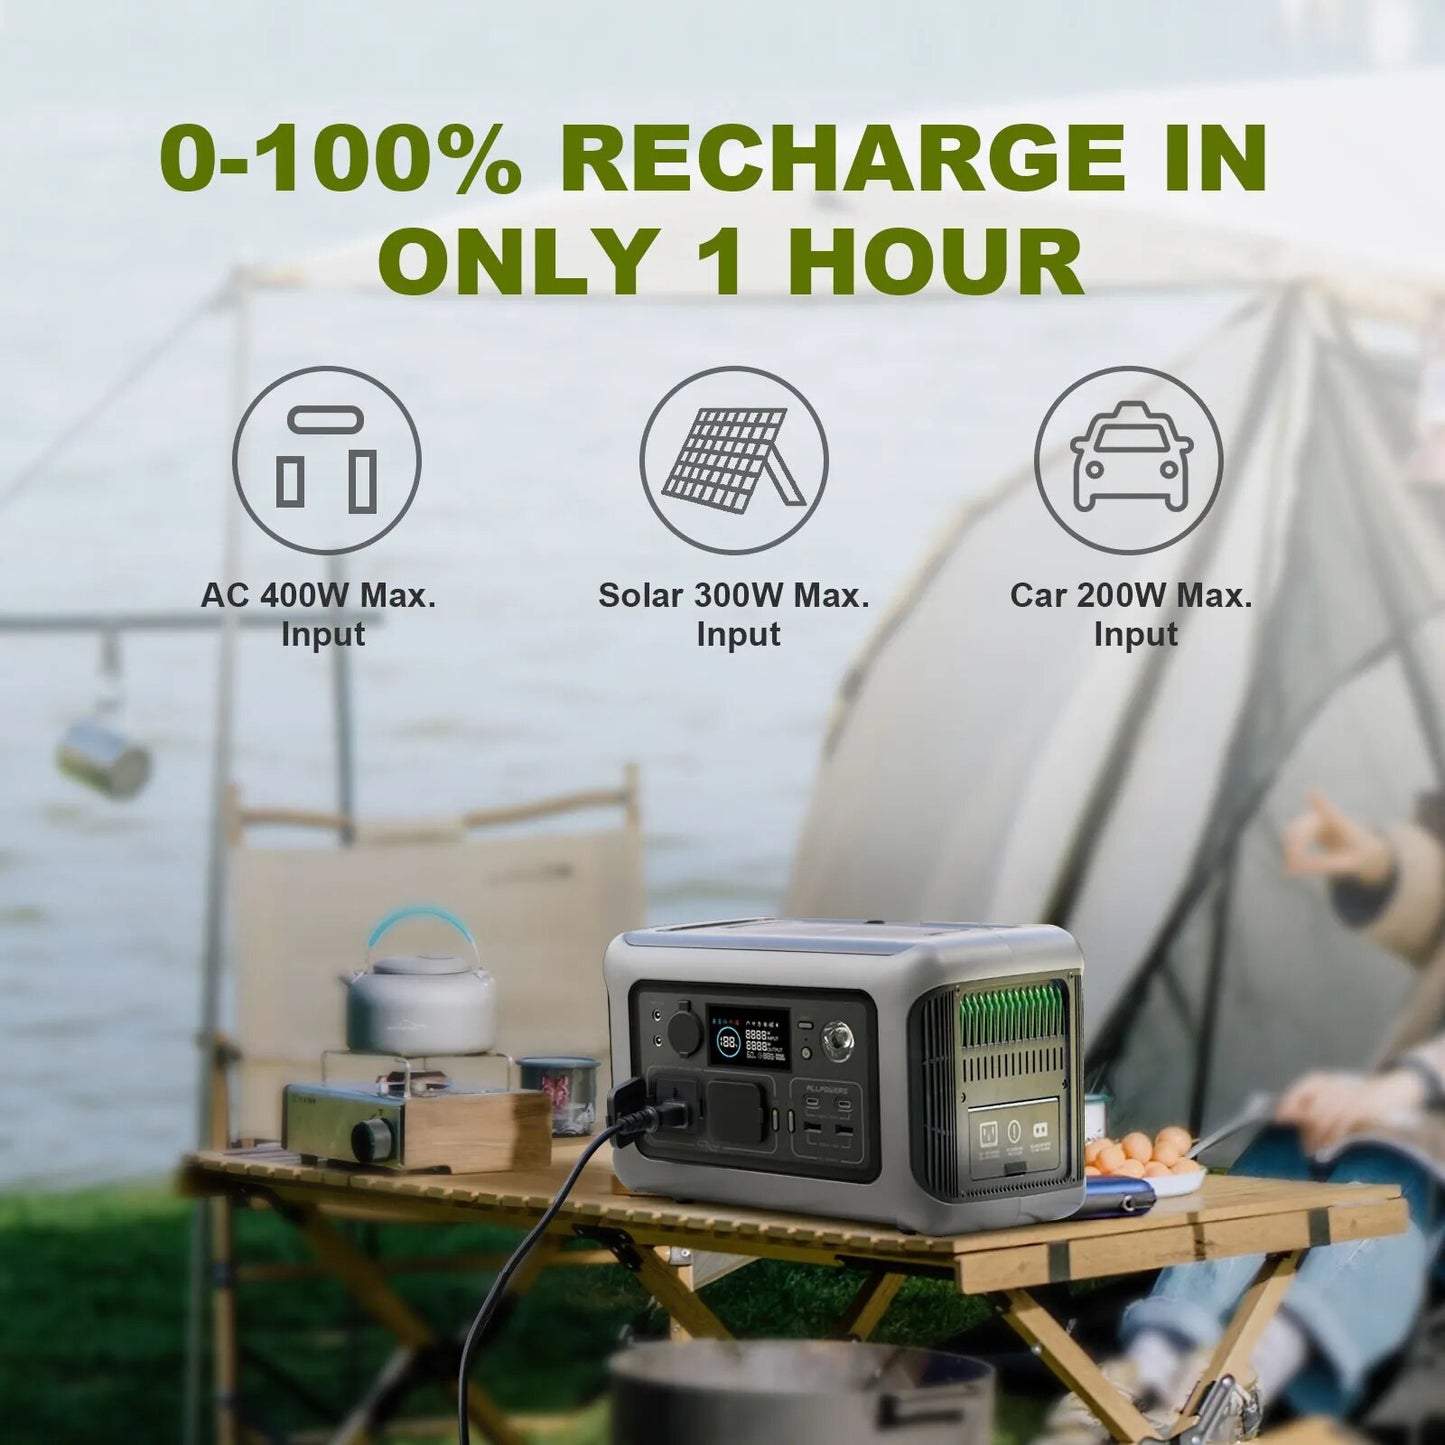 ALLPOWERS Portable Power Station R600, 299Wh LiFeP04 Battery with 2x 600W (1200W Surge) AC Outlets for Outdoor Camping RV Home